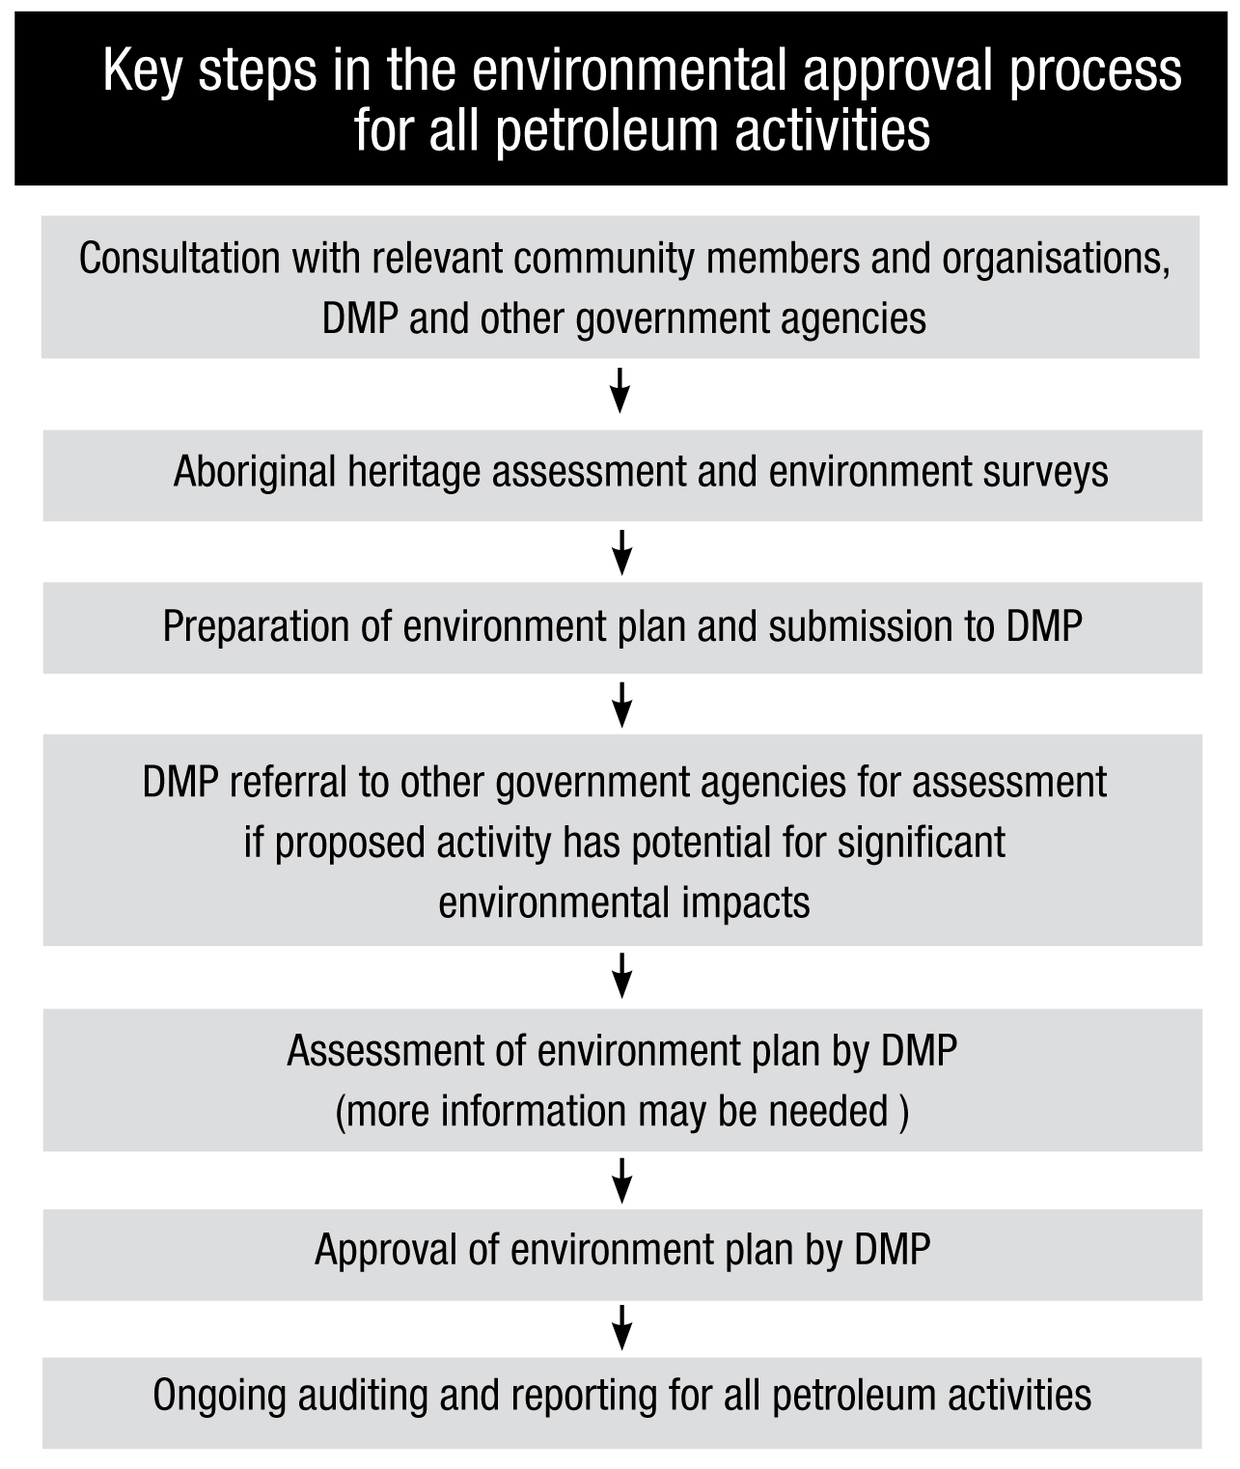 Key steps in the environmental approval process for all petroleum activities